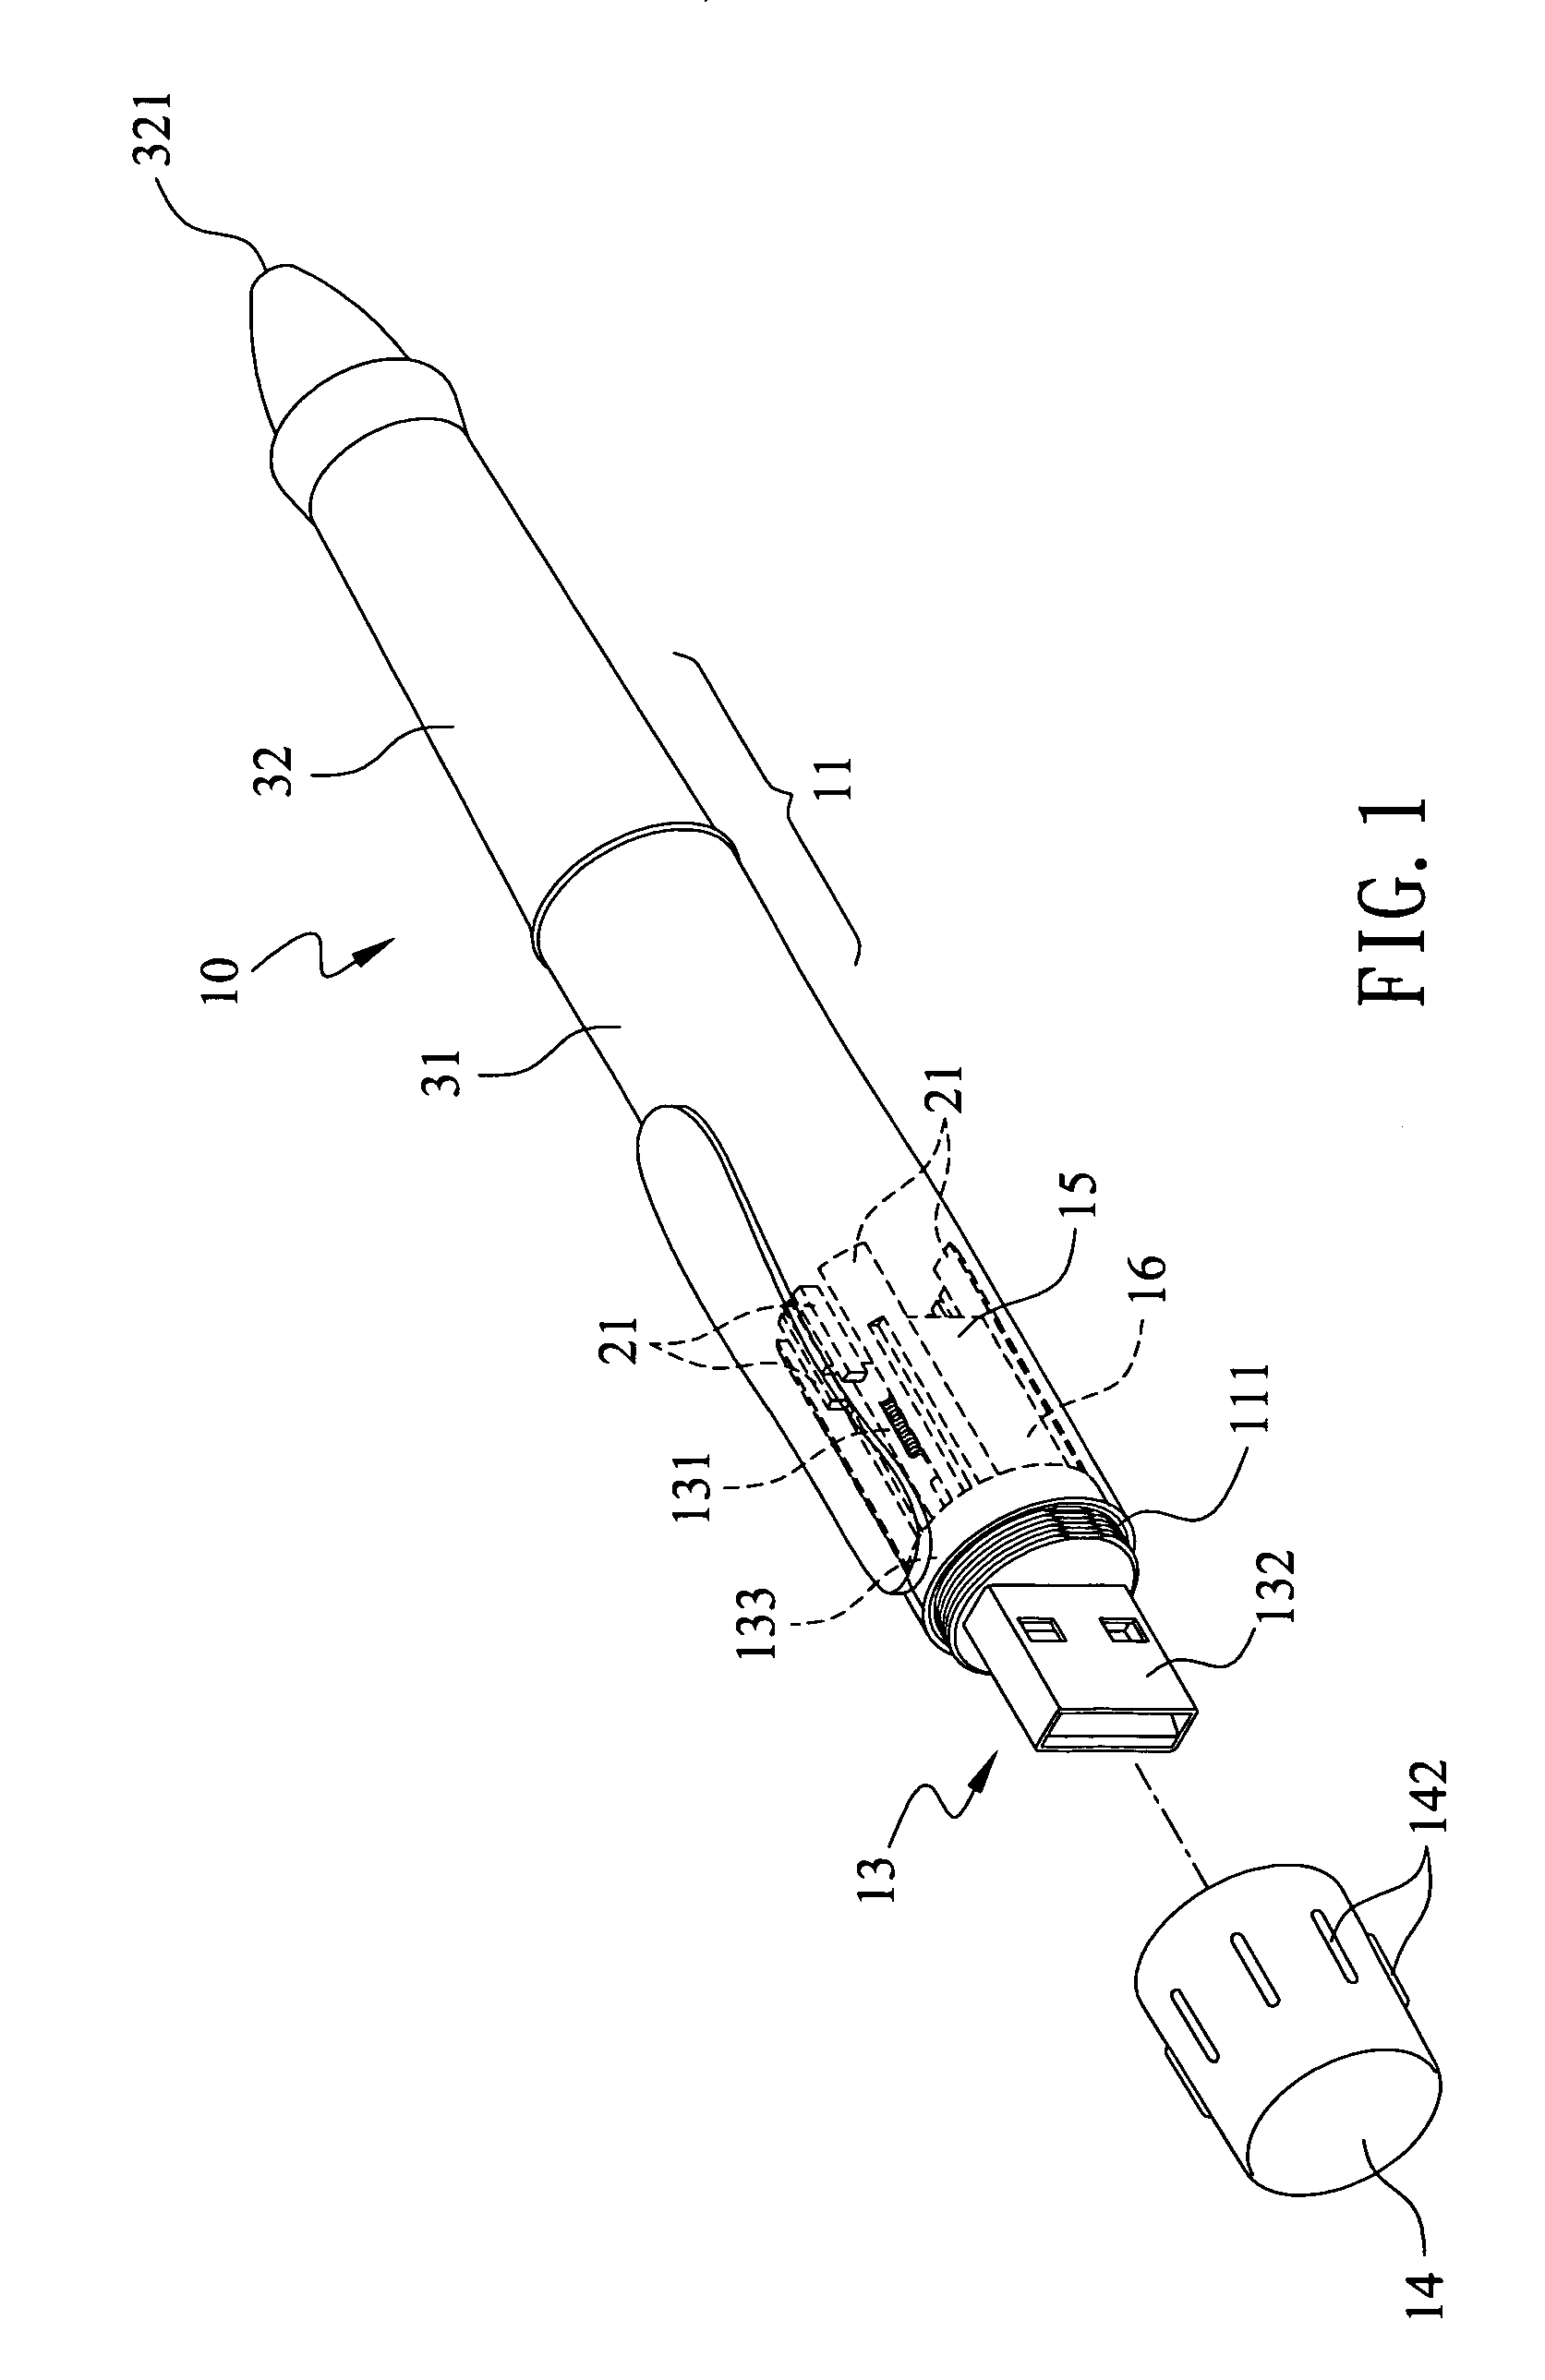 Pen with a storage function